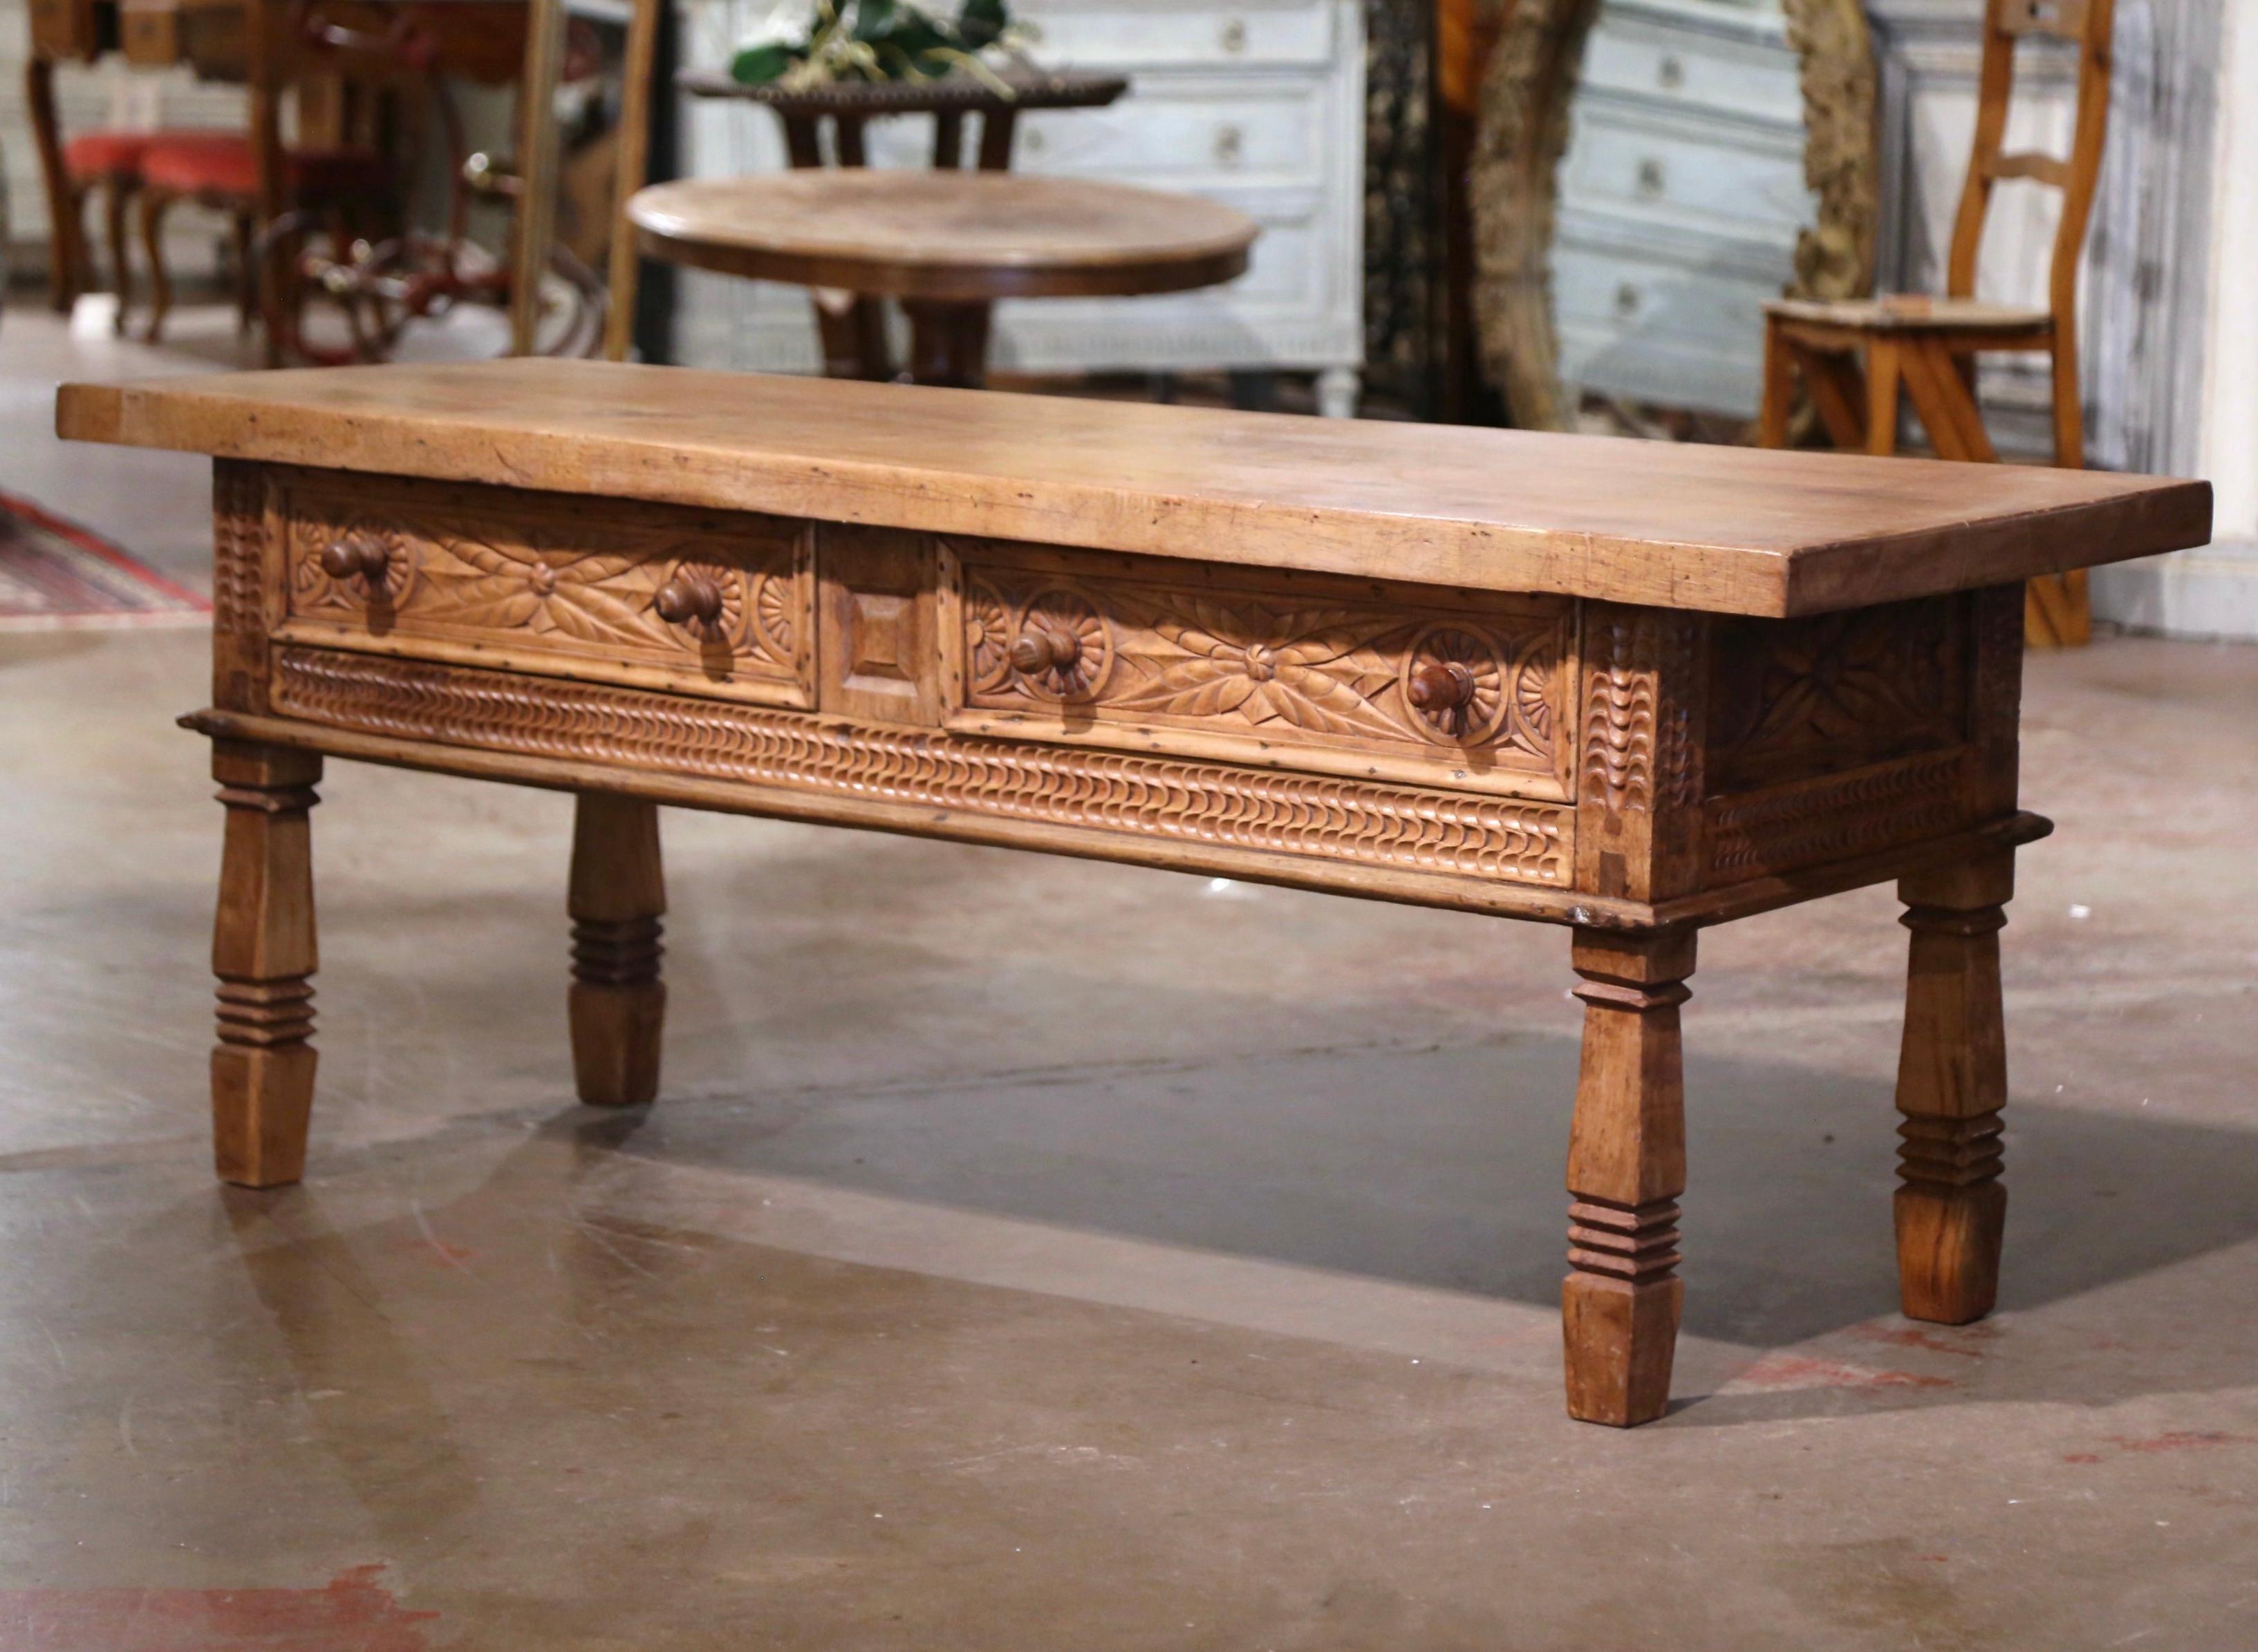 Decorate a den or living room with this elegant antique coffee table. Created in Spain, circa 1850 and richly carved all around, the long table stands on four carved turned legs. The Baroque table features two drawers across the front decorated with